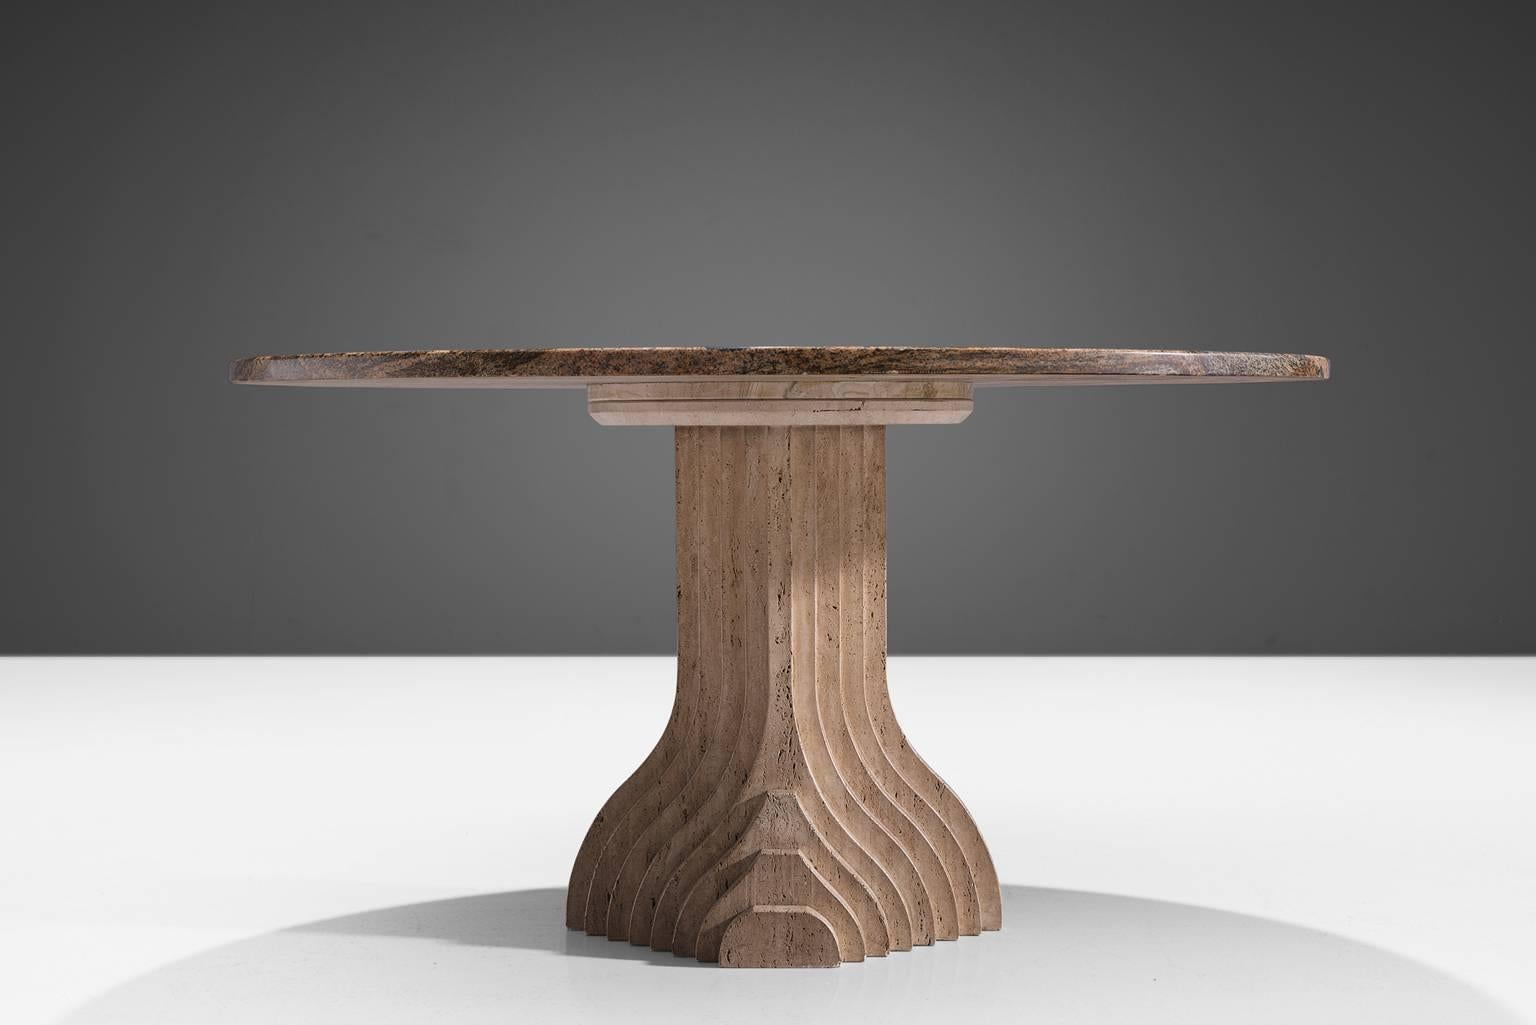 Italian Architectural Dining Table in Travertine